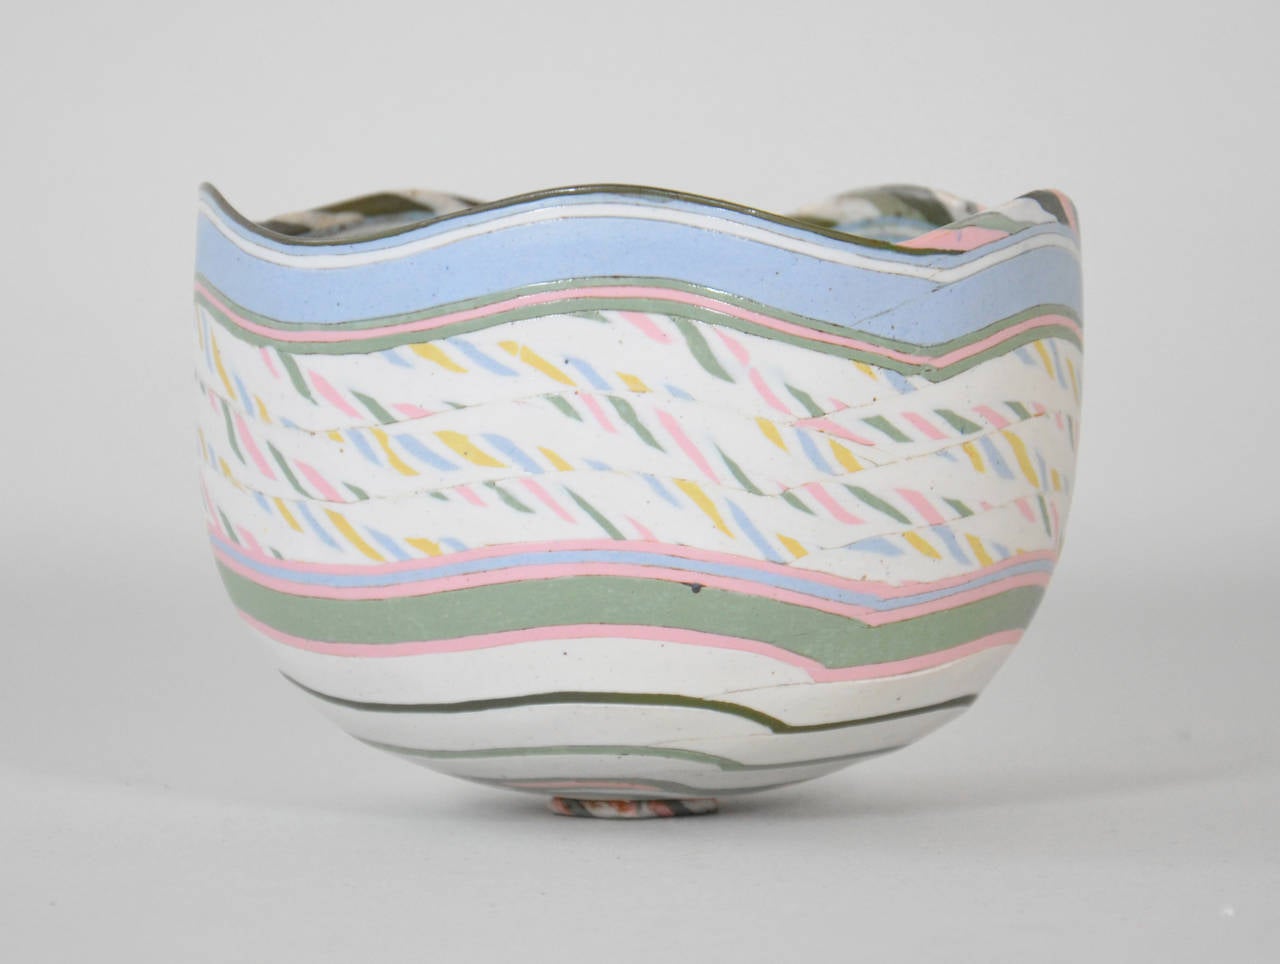 ”Confetti” porcelain bowl. Signed with monogram HMA . Dated 1981. 

We ship this item worldwide, please write to contact@apetersen.dk for shipping options and prices.